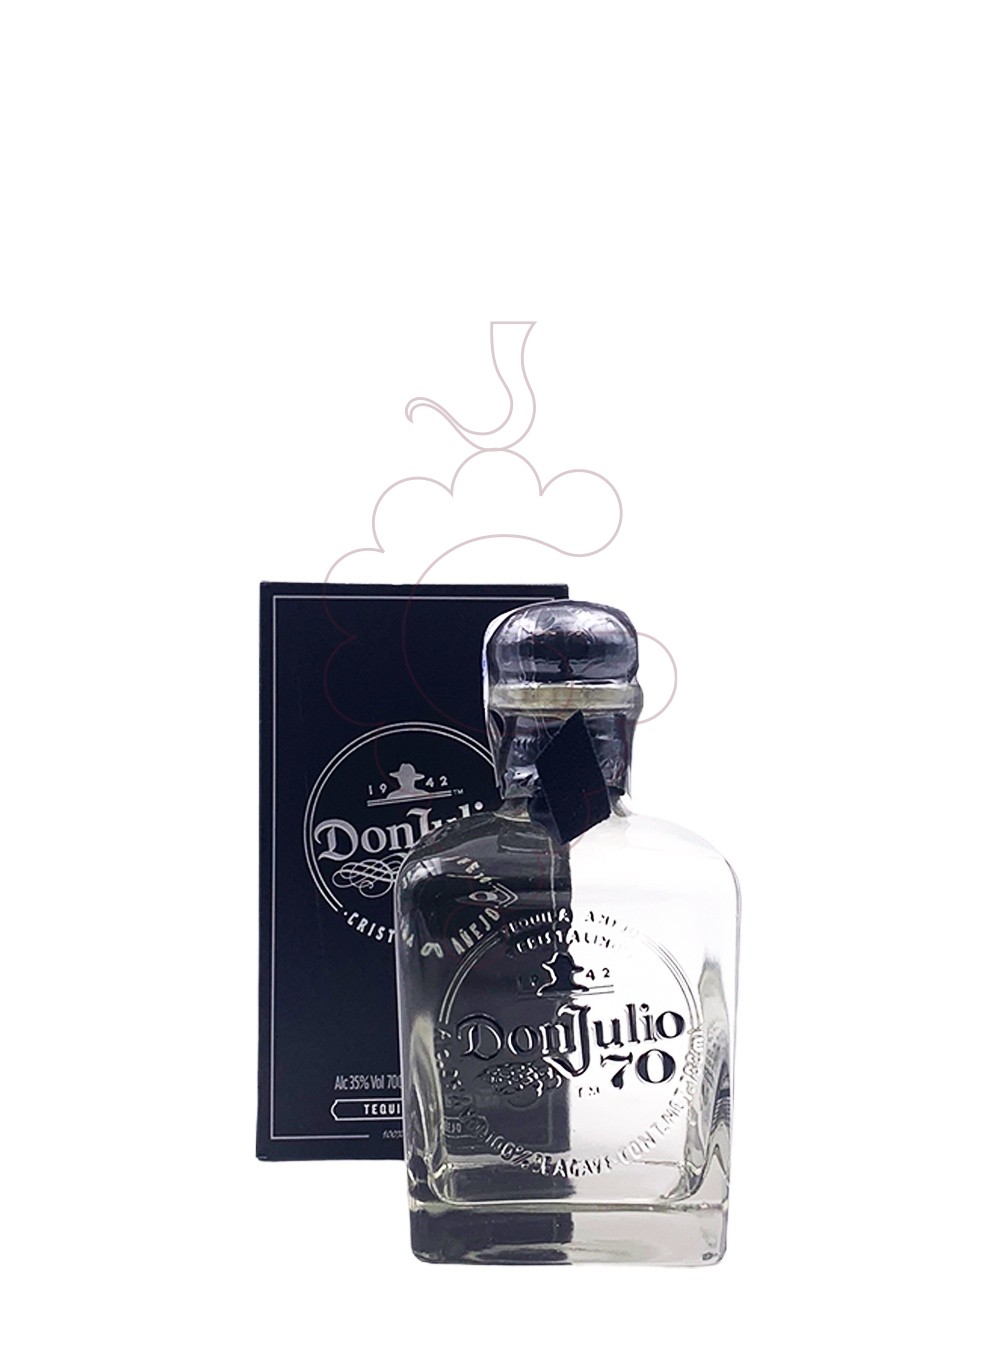 Photo Tequila Don julio 70 th